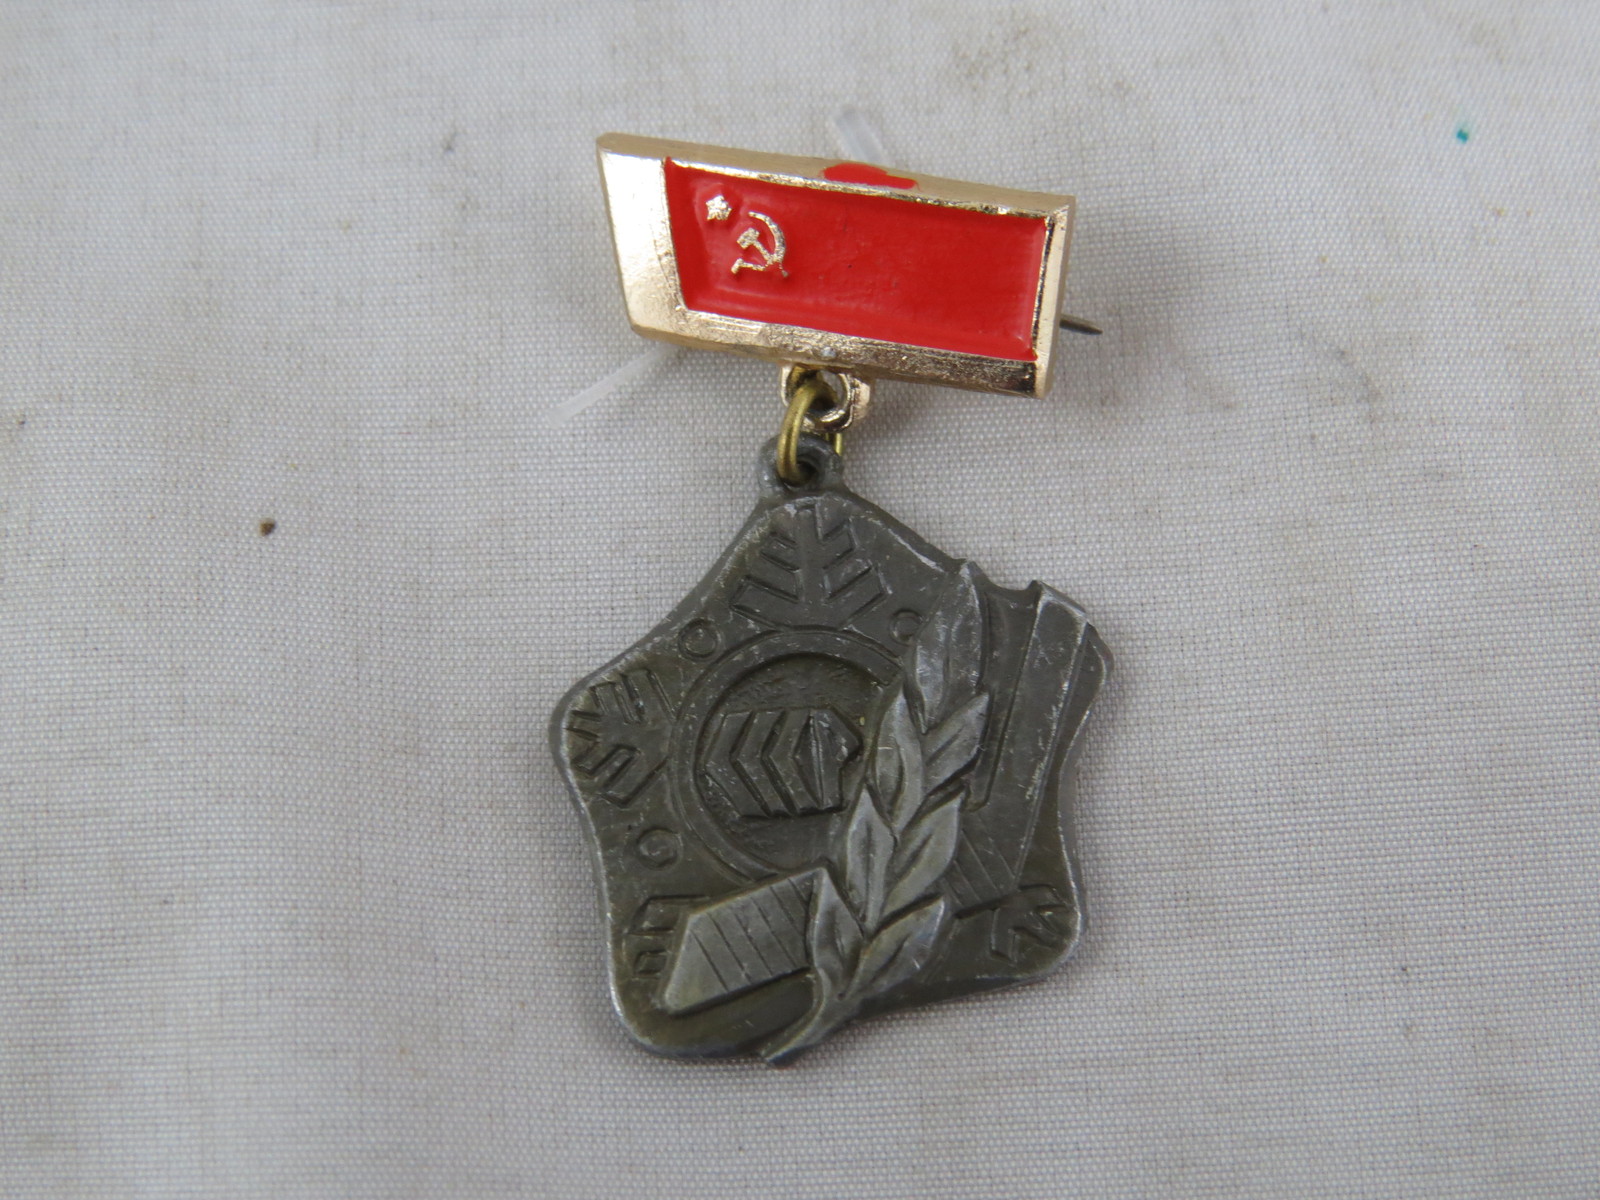 Primary image for 1973 World Hockey Championship Pin - Team USSR - Medallion Pin Stamped Graphics